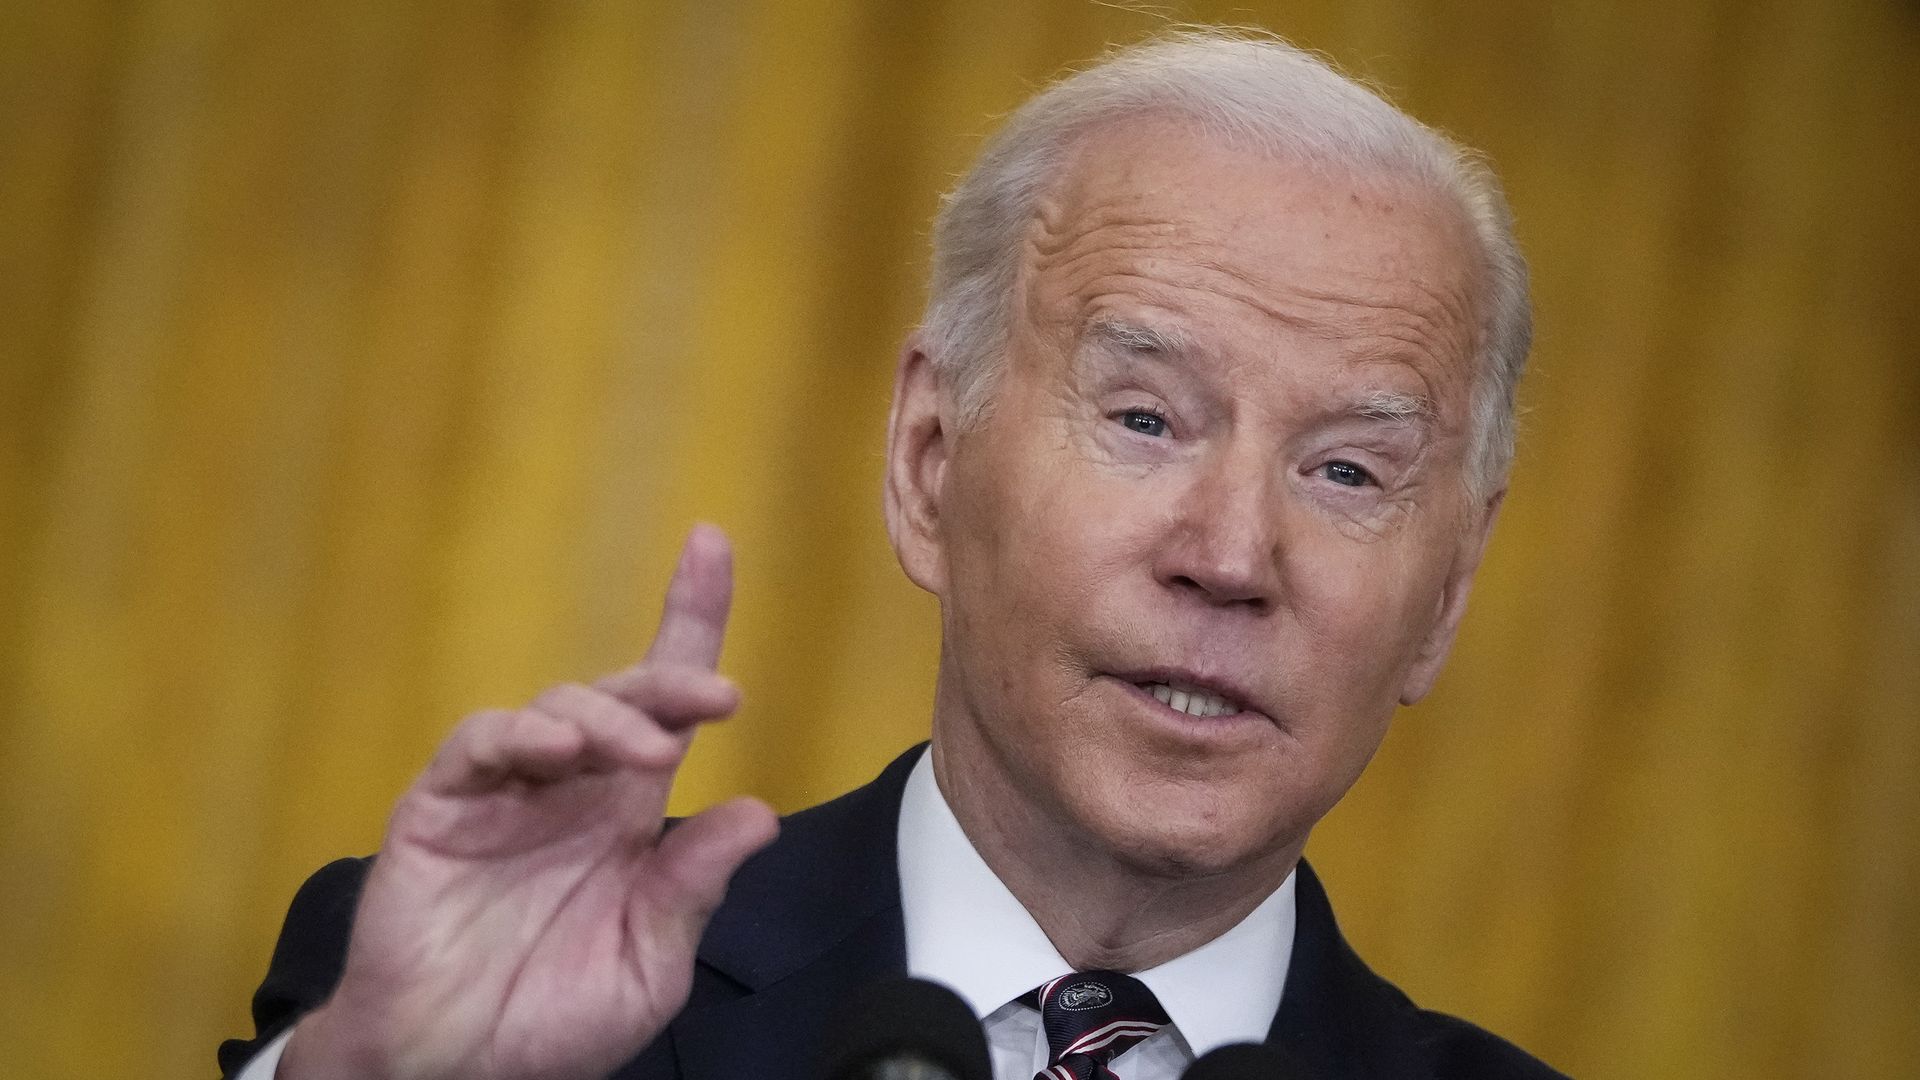 President Joe Biden delivers remarks on developments in Ukraine and Russia, and announces sanctions against Russia at the White House.